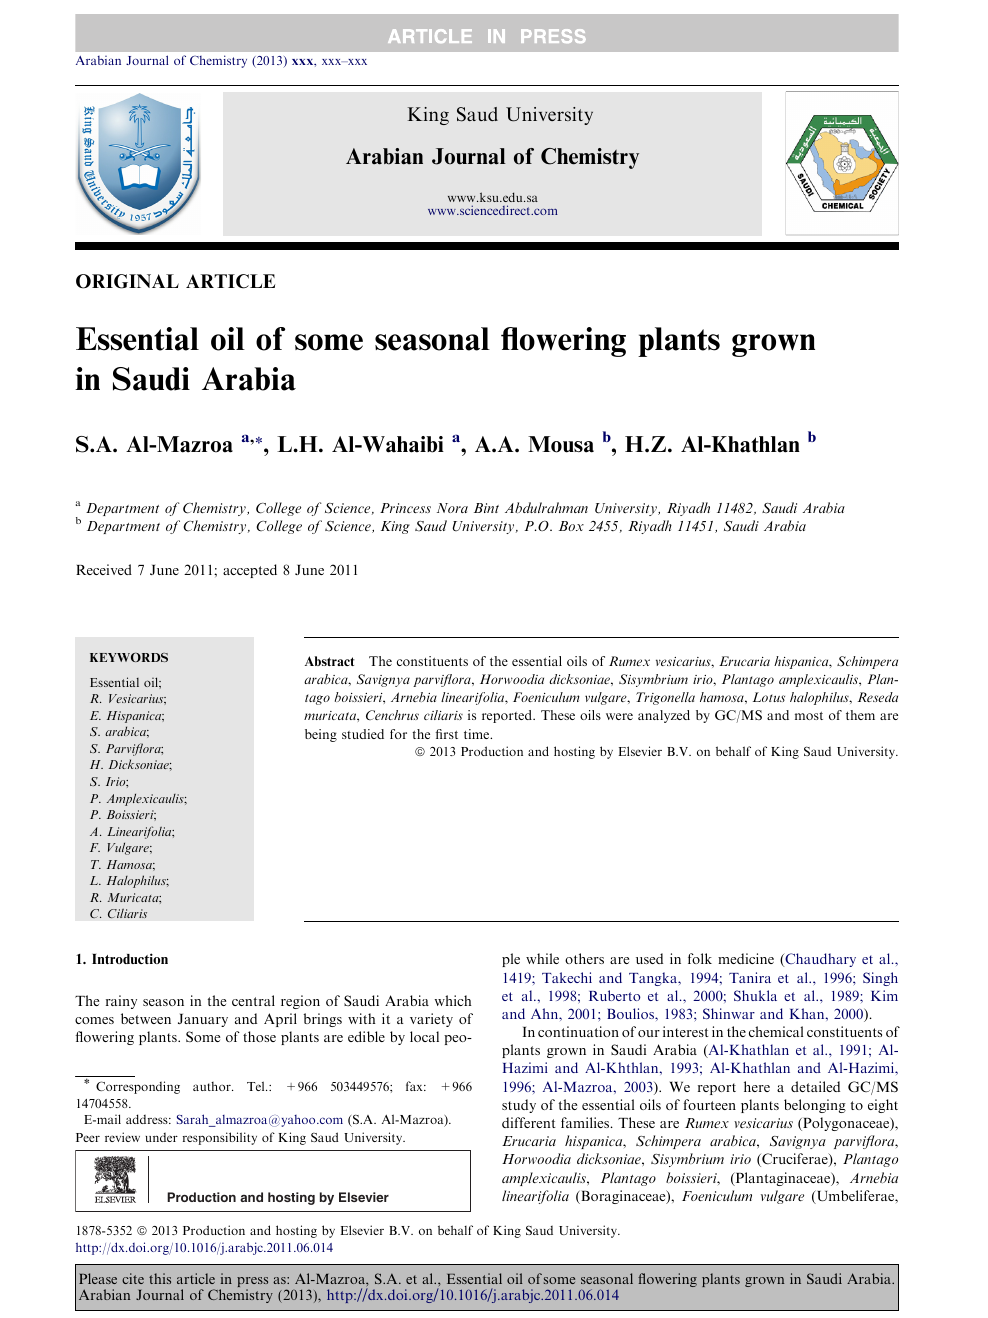 Essential Oil Of Some Seasonal Flowering Plants Grown In Saudi Arabia Topic Of Research Paper In Chemical Sciences Download Scholarly Article Pdf And Read For Free On Cyberleninka Open Science Hub